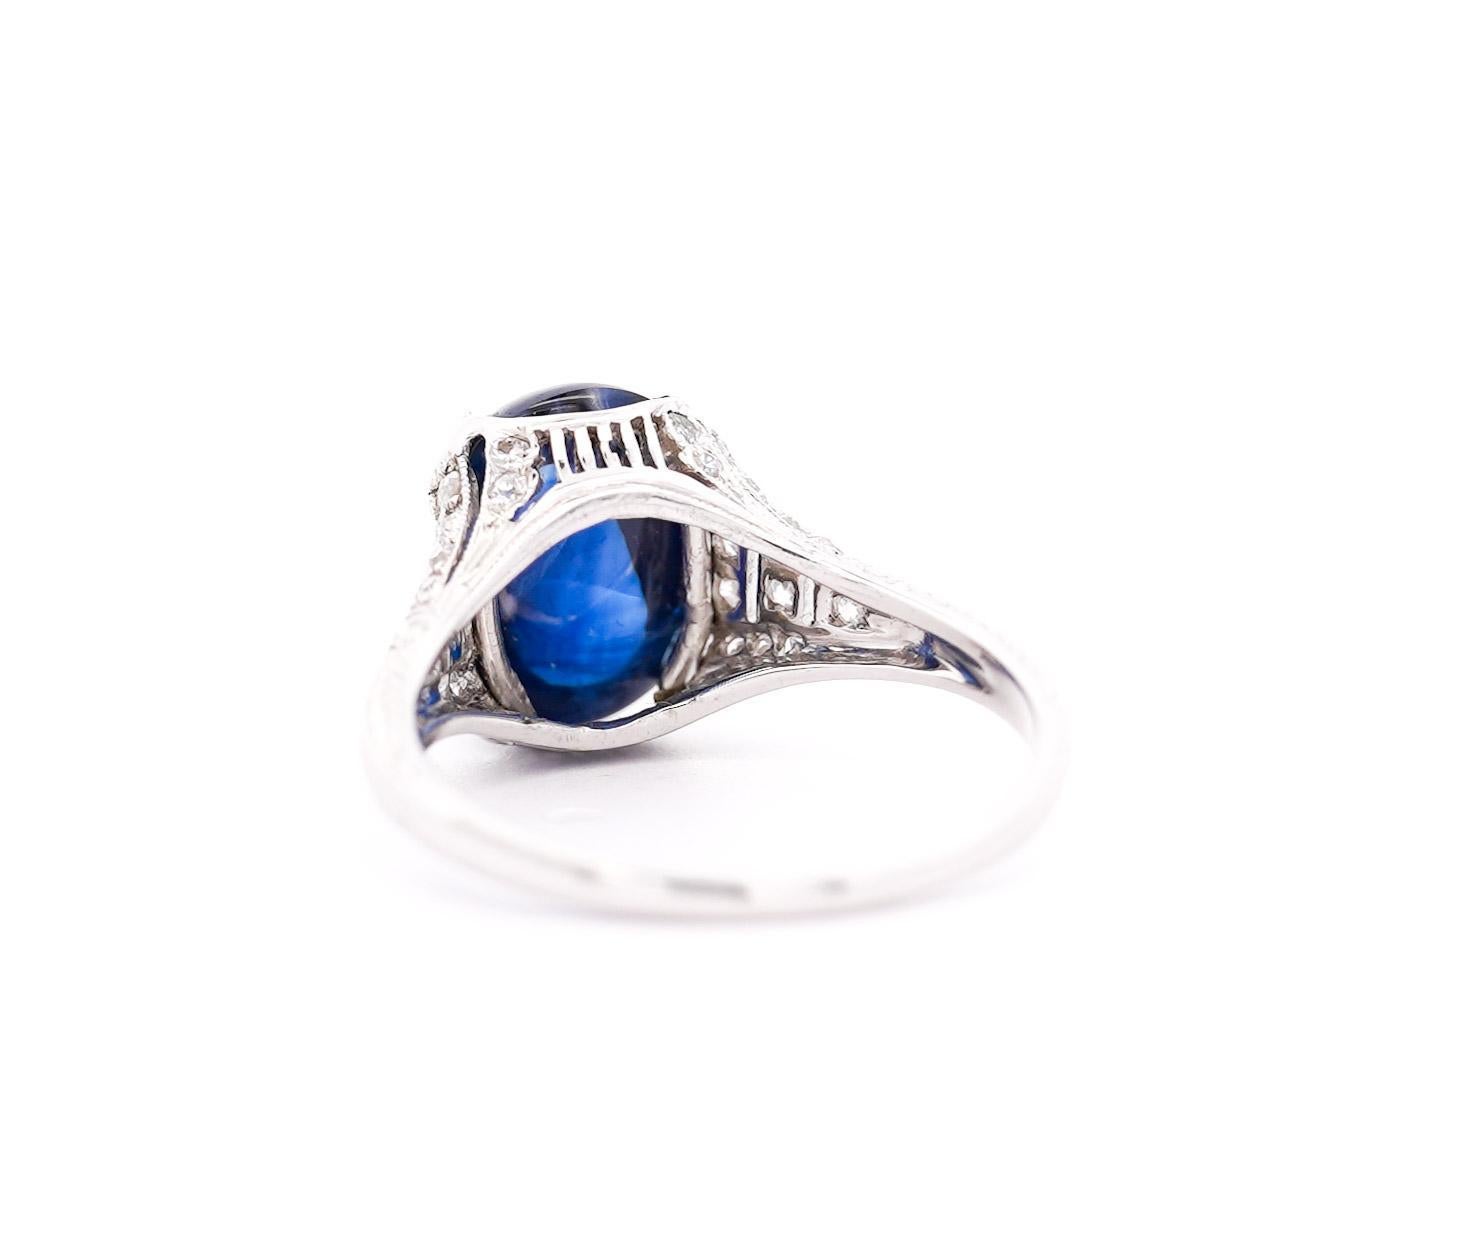 A mesmerizing 5.50 carat cabochon sapphire from Sri Lanka shimmers at the heart of this Art Deco masterpiece in a stunning prong and halo setting. Crafted in platinum, its intricate filigree echoes the era's glamour, while 32 diamonds add a touch of